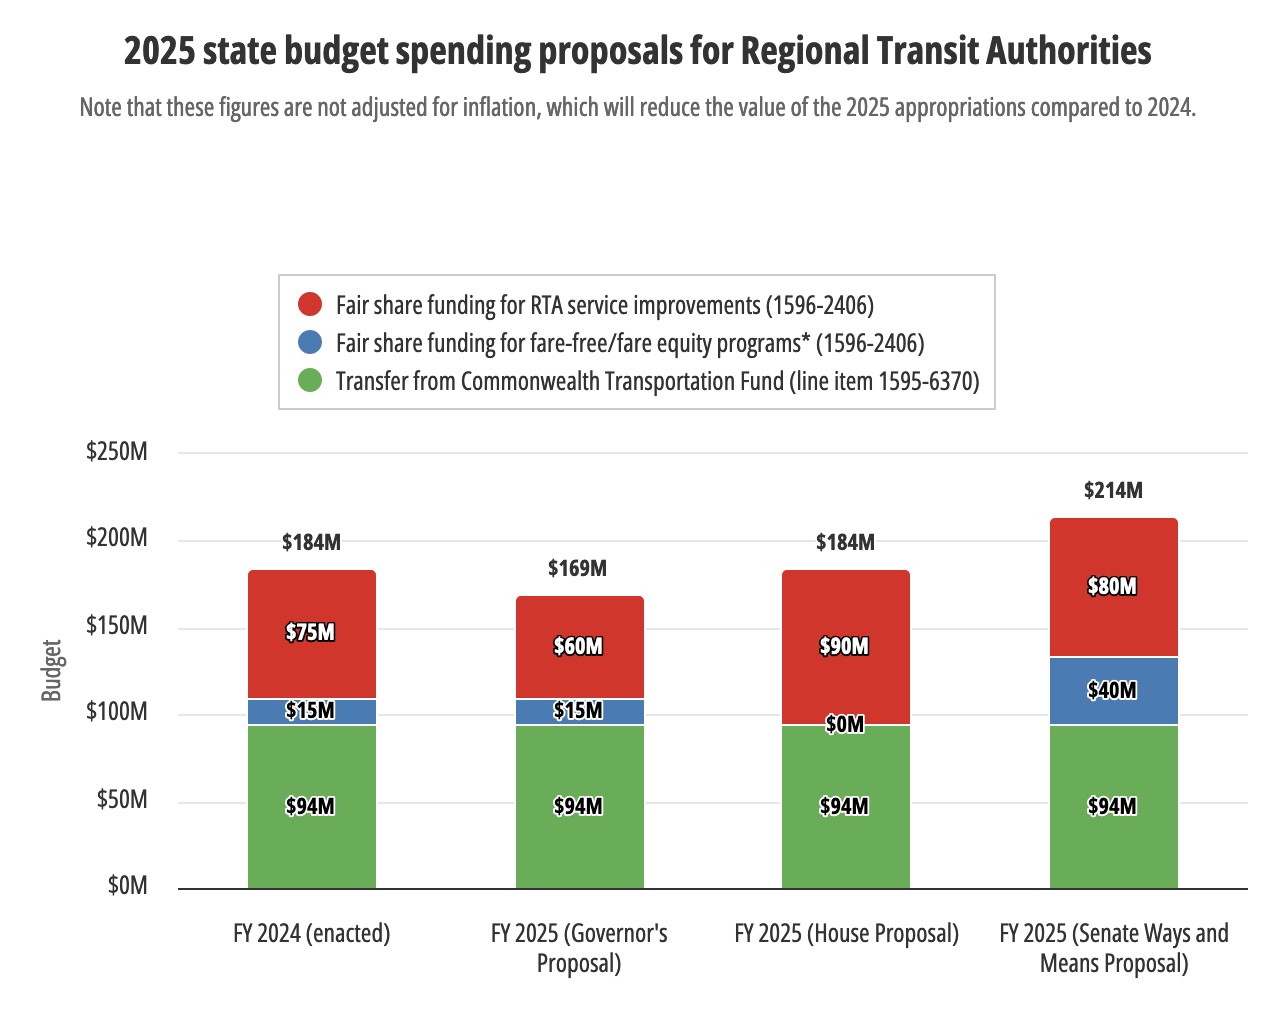 A bar chart comparing budget proposals for Massachusetts regional transit authorities. The stacked bar at the left shows current (2024) funding levels, amounting to $184 million; the next stacked bar shows the Governor's proposed spending, with a shorter column and a total of $169 million; the next column represents the House budget proposal, which is the same height as the 2024 budget with $184 M, and the rightmost, tallest column represents the Senate budget, with $214 million for RTAs.